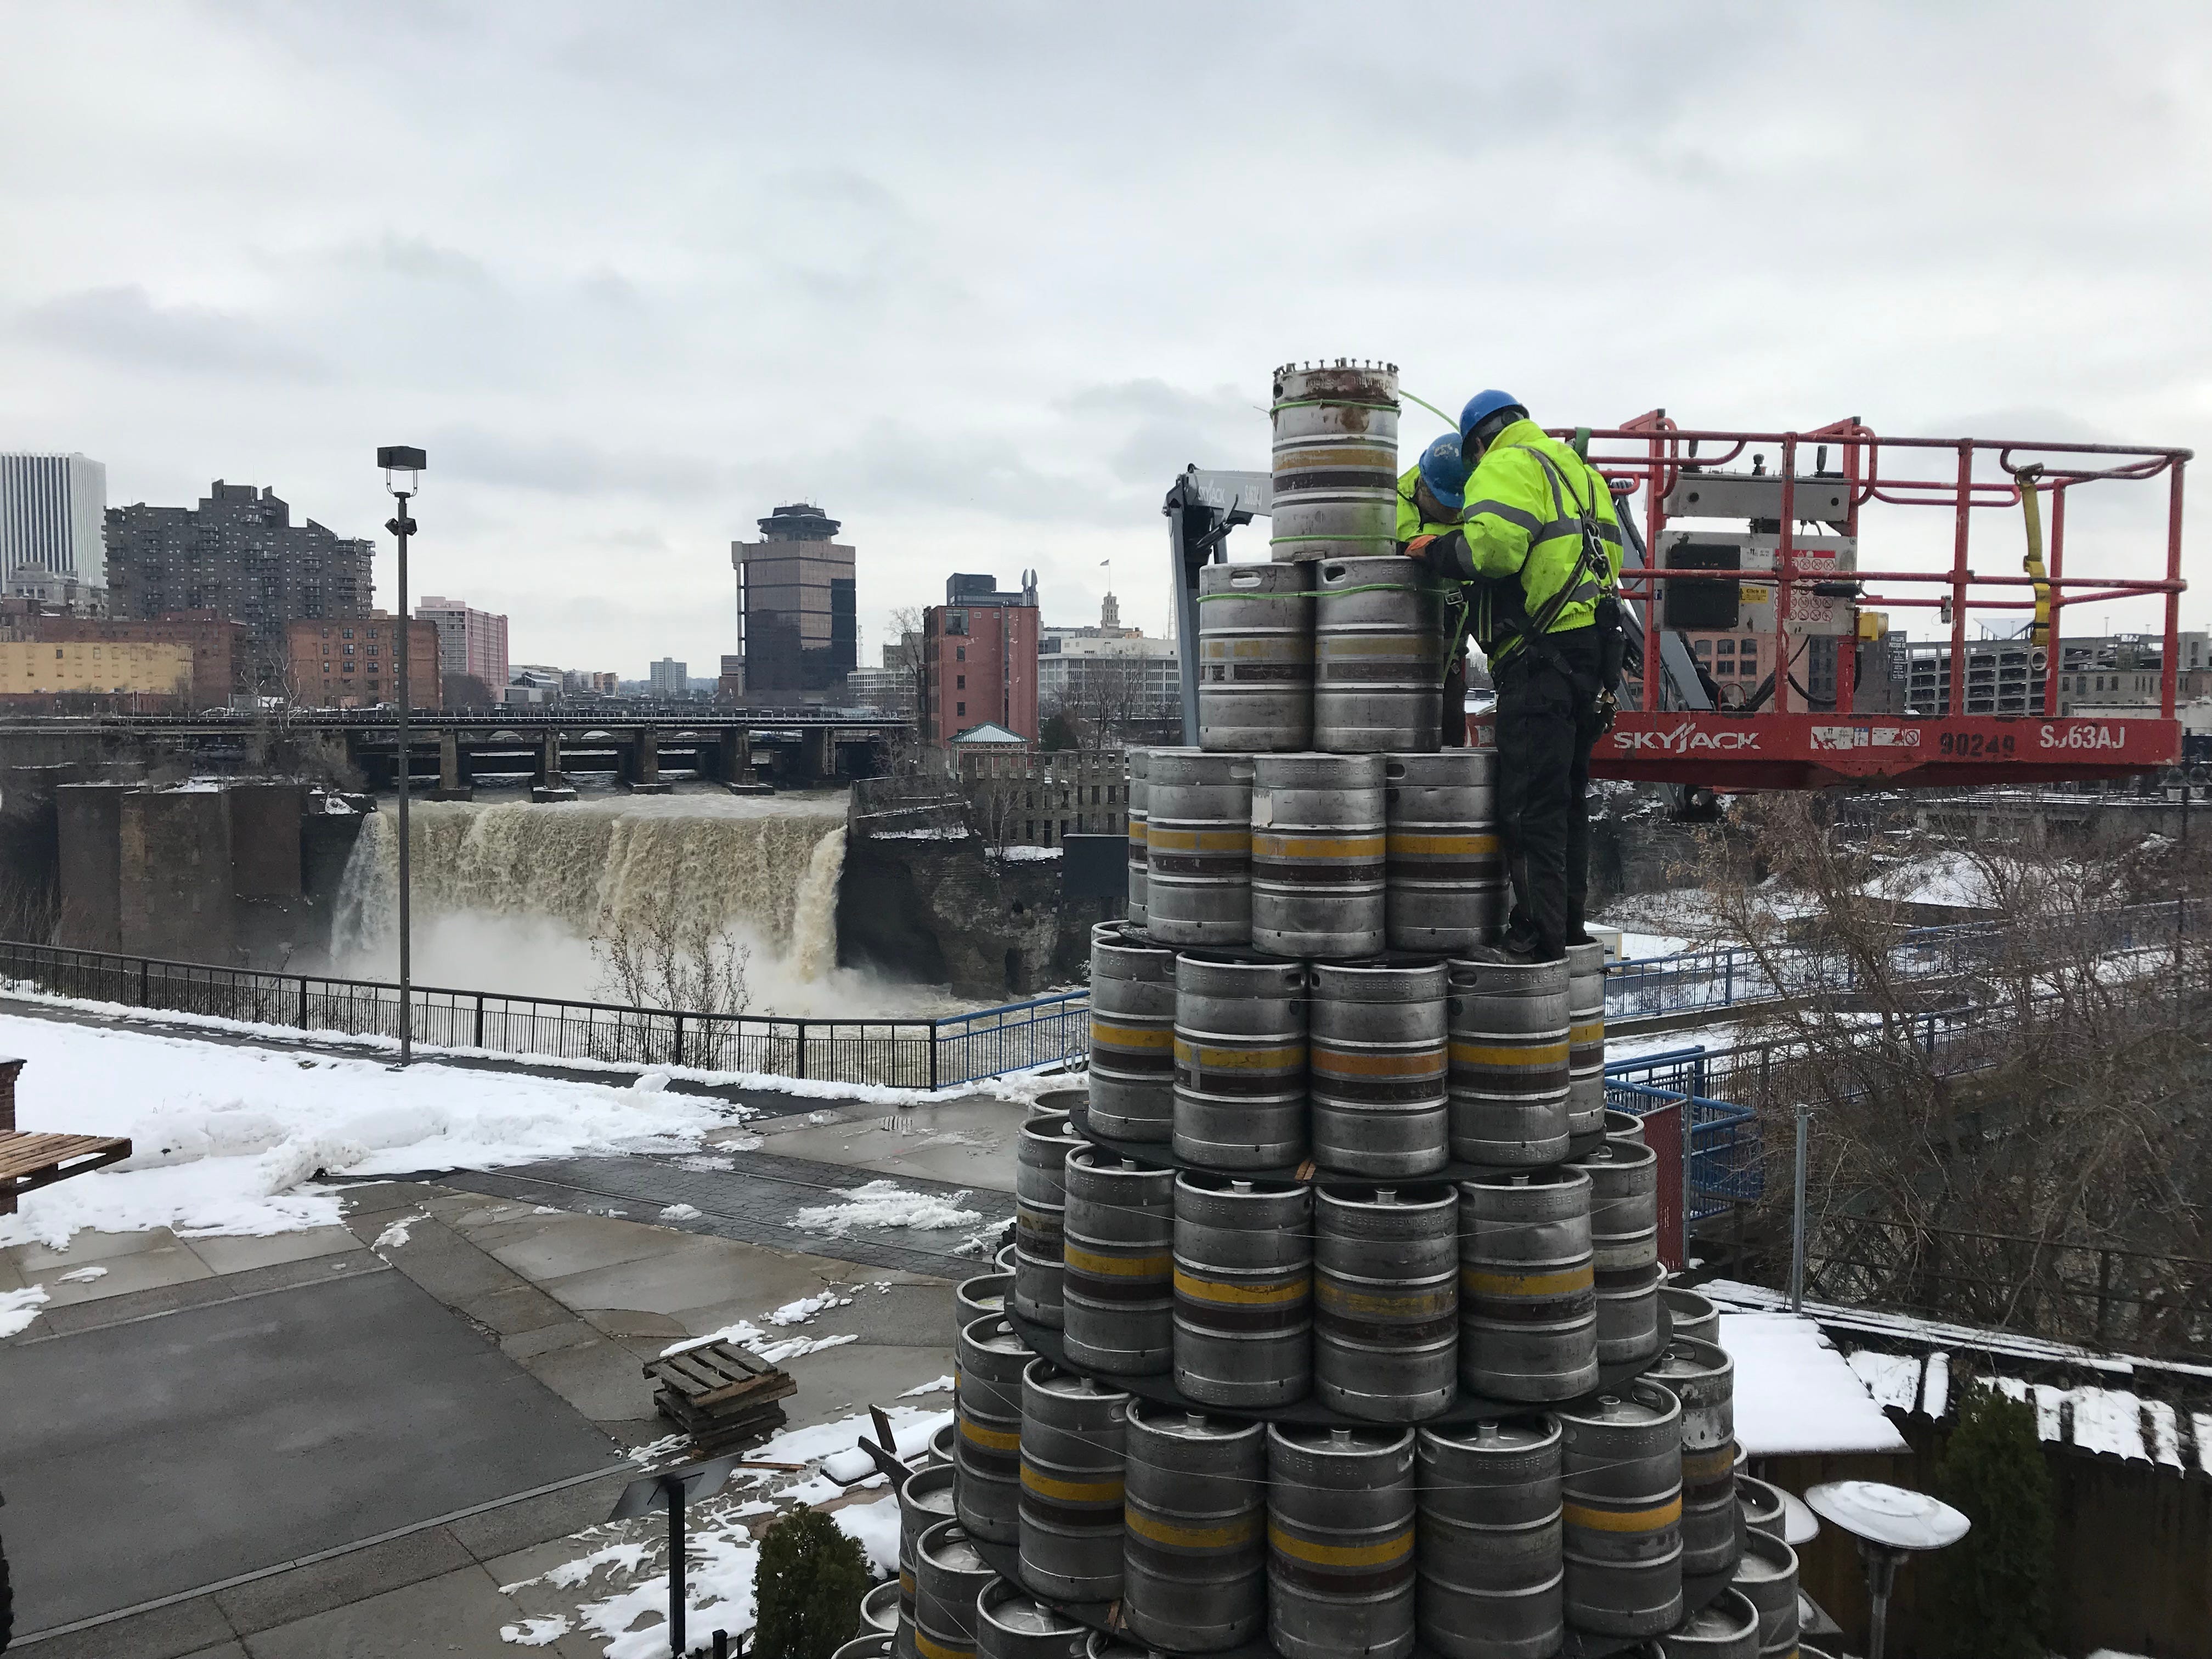 Genesee Brewery keg tree even bigger and brighter this year